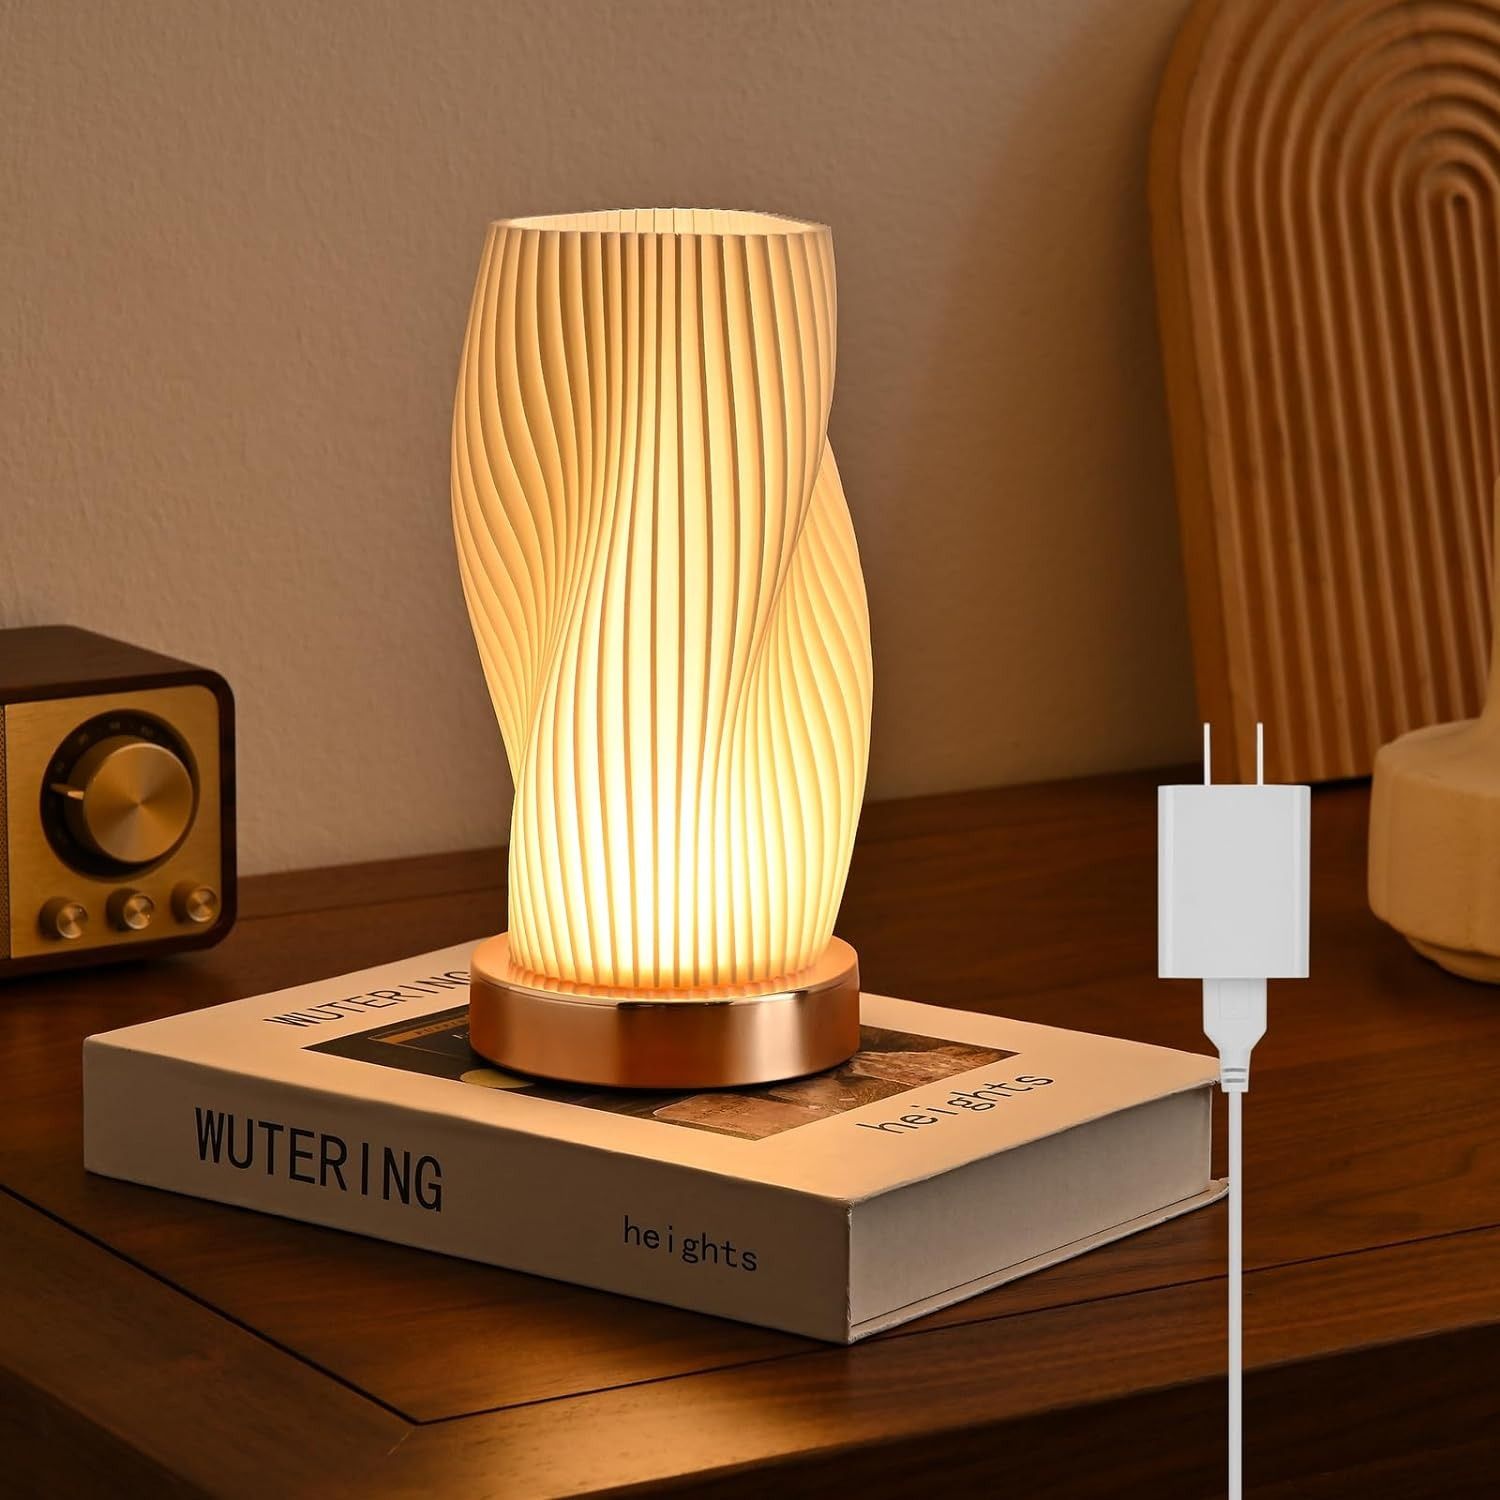 Lamps For Bedside Tables In The Bedroom : Choosing The Perfect Lamp For Your Bedroom Nightstand